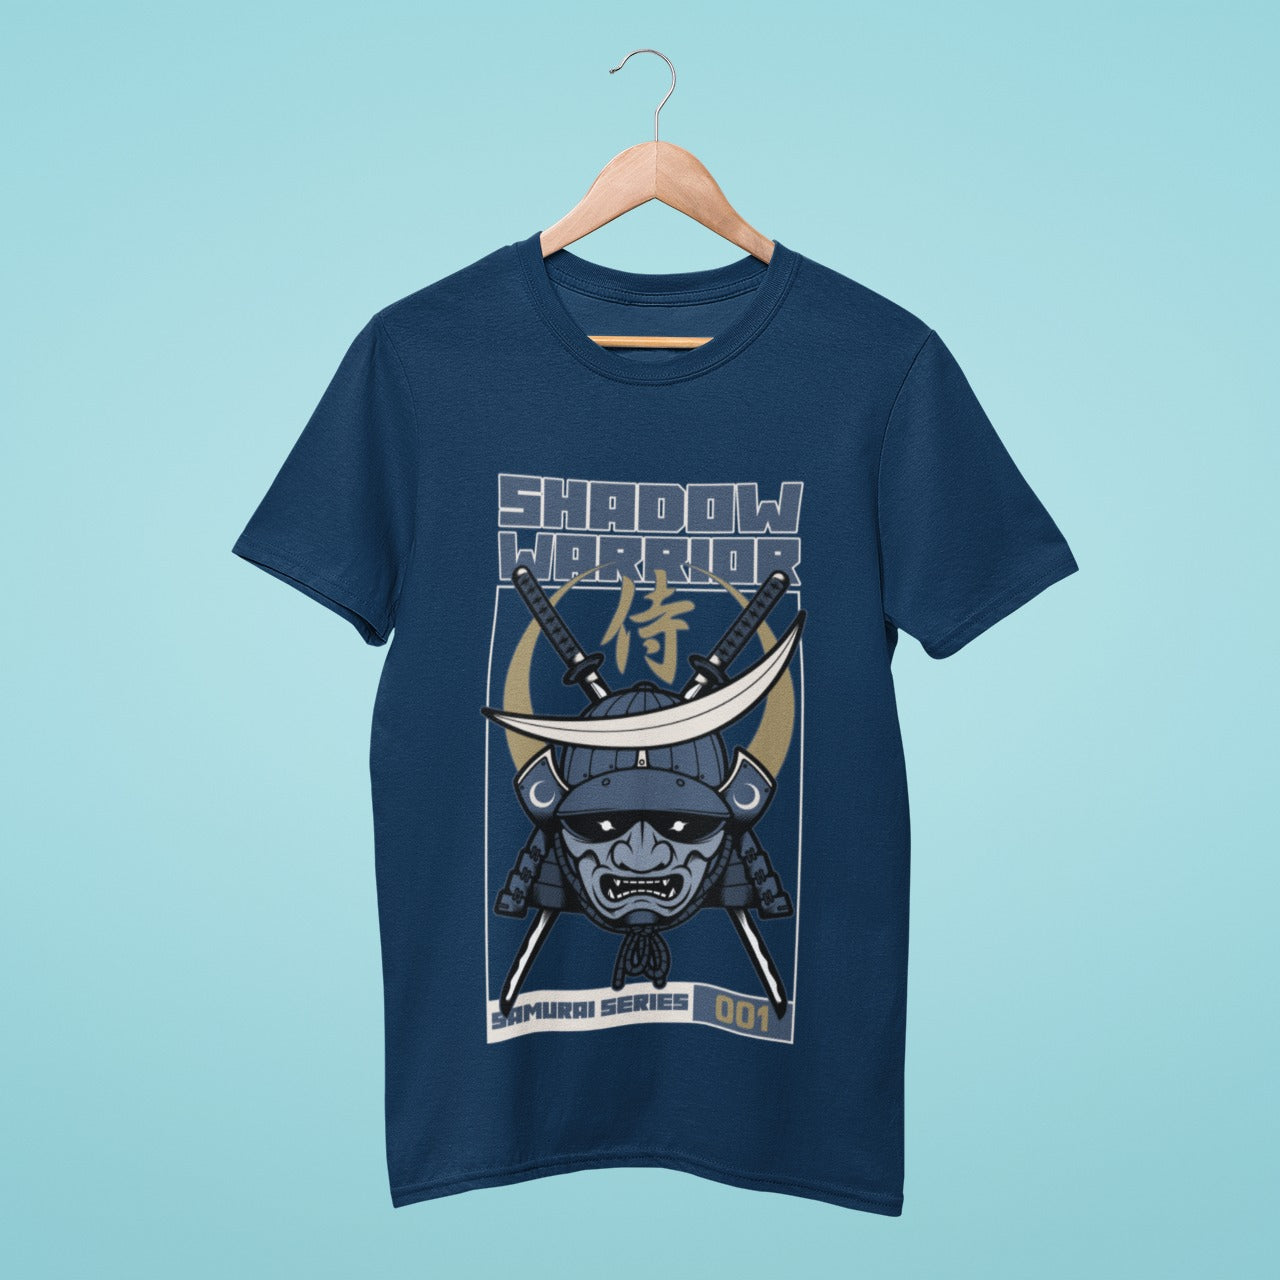 Unleash your inner shadow warrior with this blue t-shirt featuring a stunning samurai helmet design. Adorned with a crescent moon ornament, the Shadow Warrior title sets the tone for a powerful and striking look.